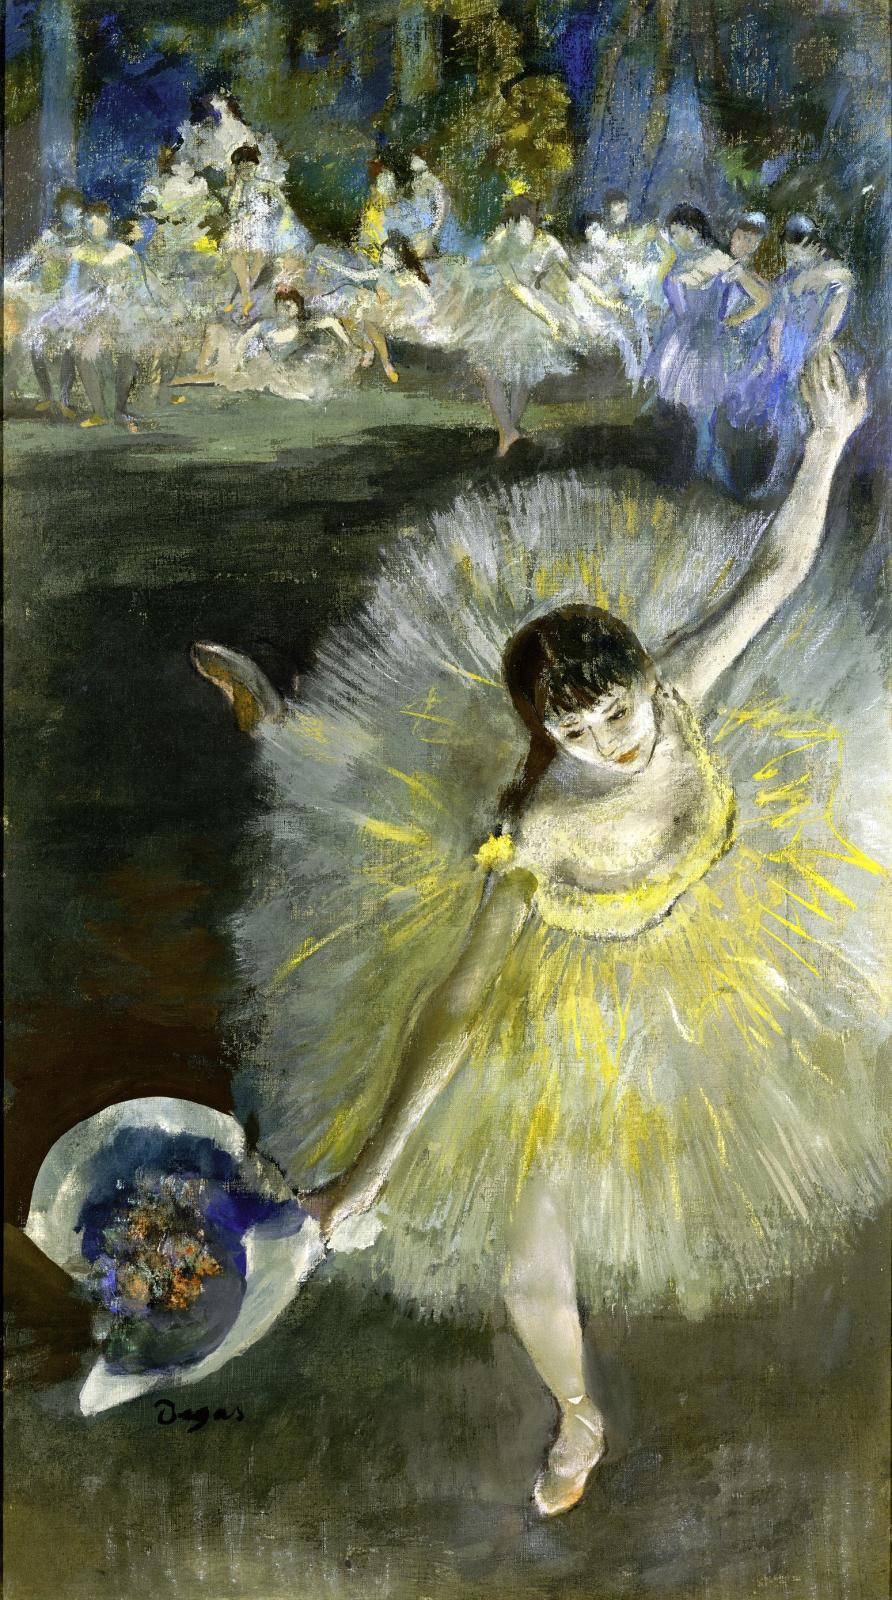 Edgar Degas Capturing a world of movement Pursuit by The University of Melbourne